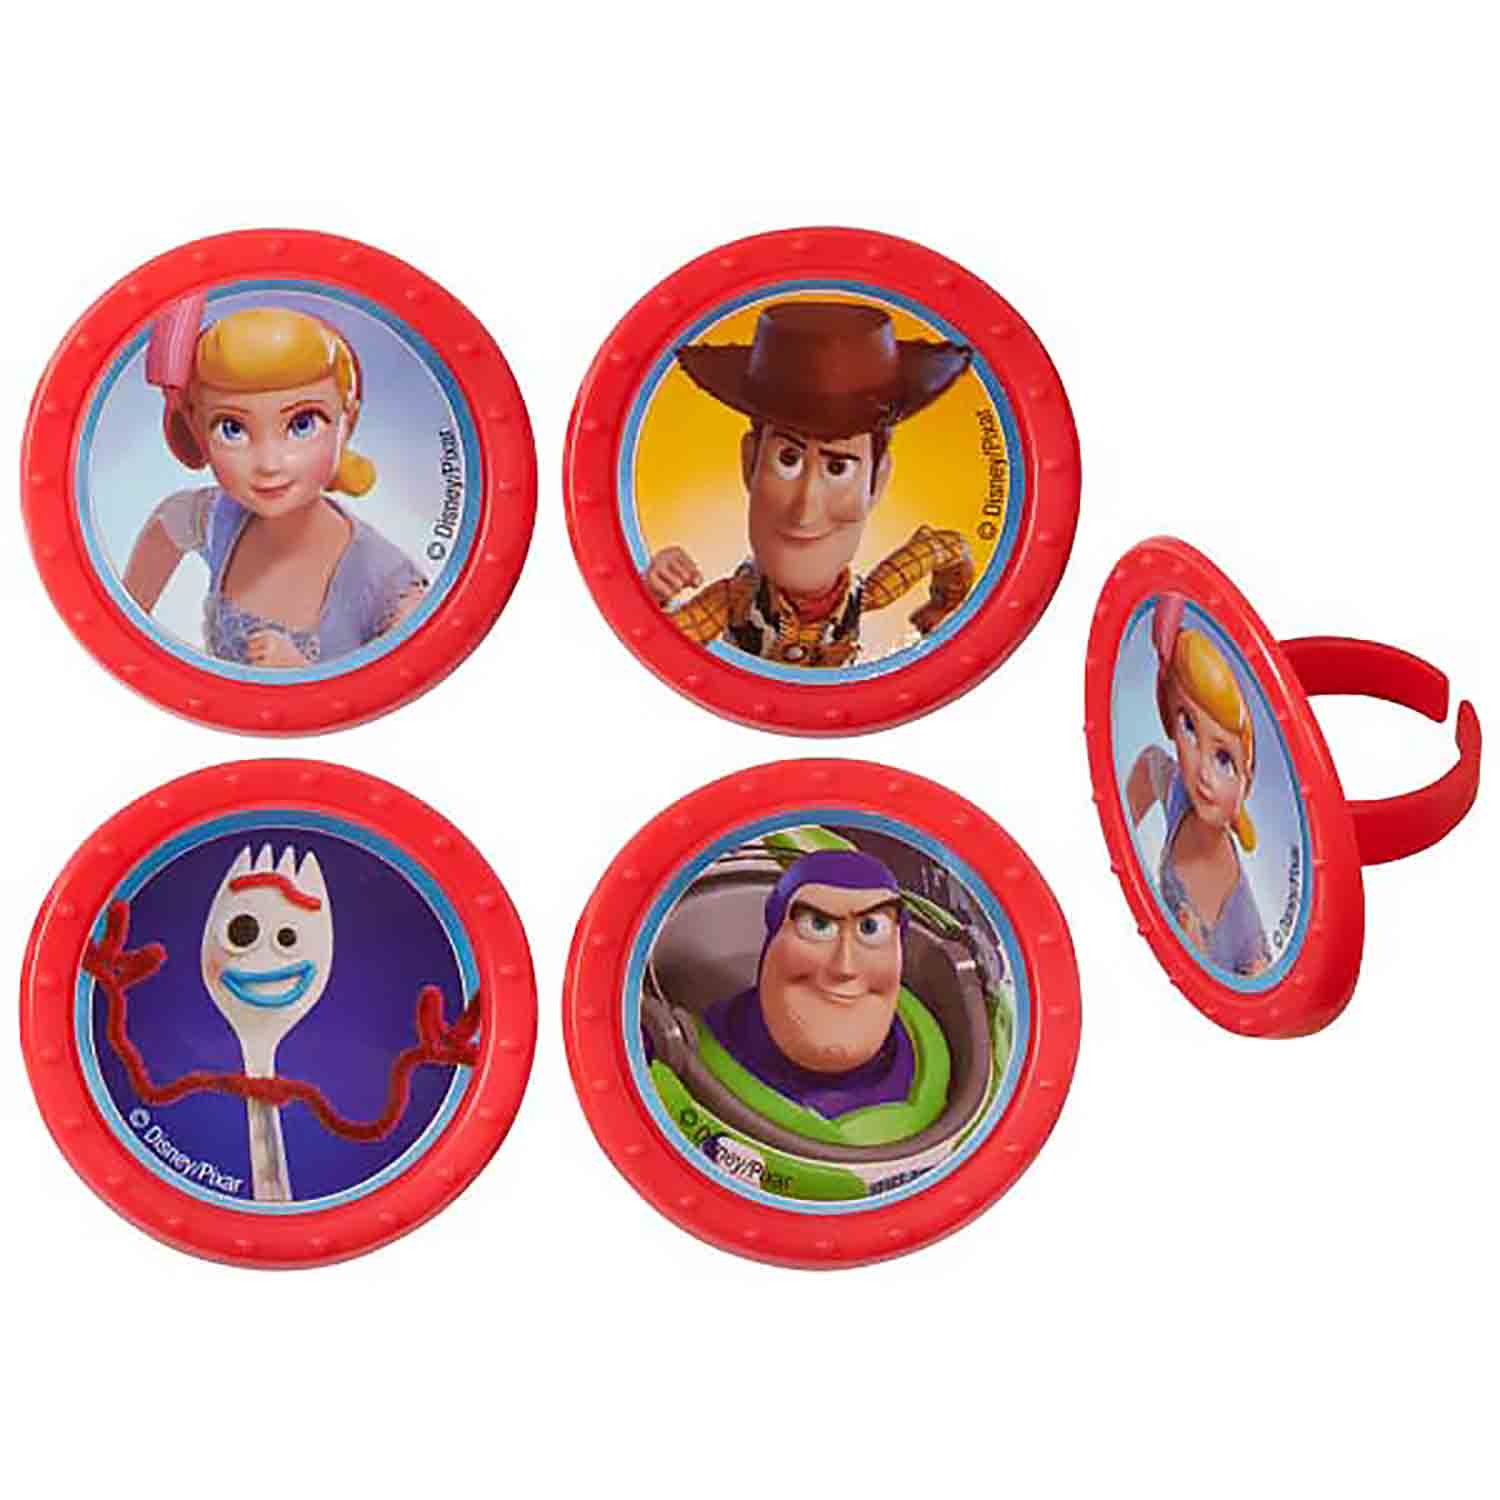 Toy Story 4 Rings